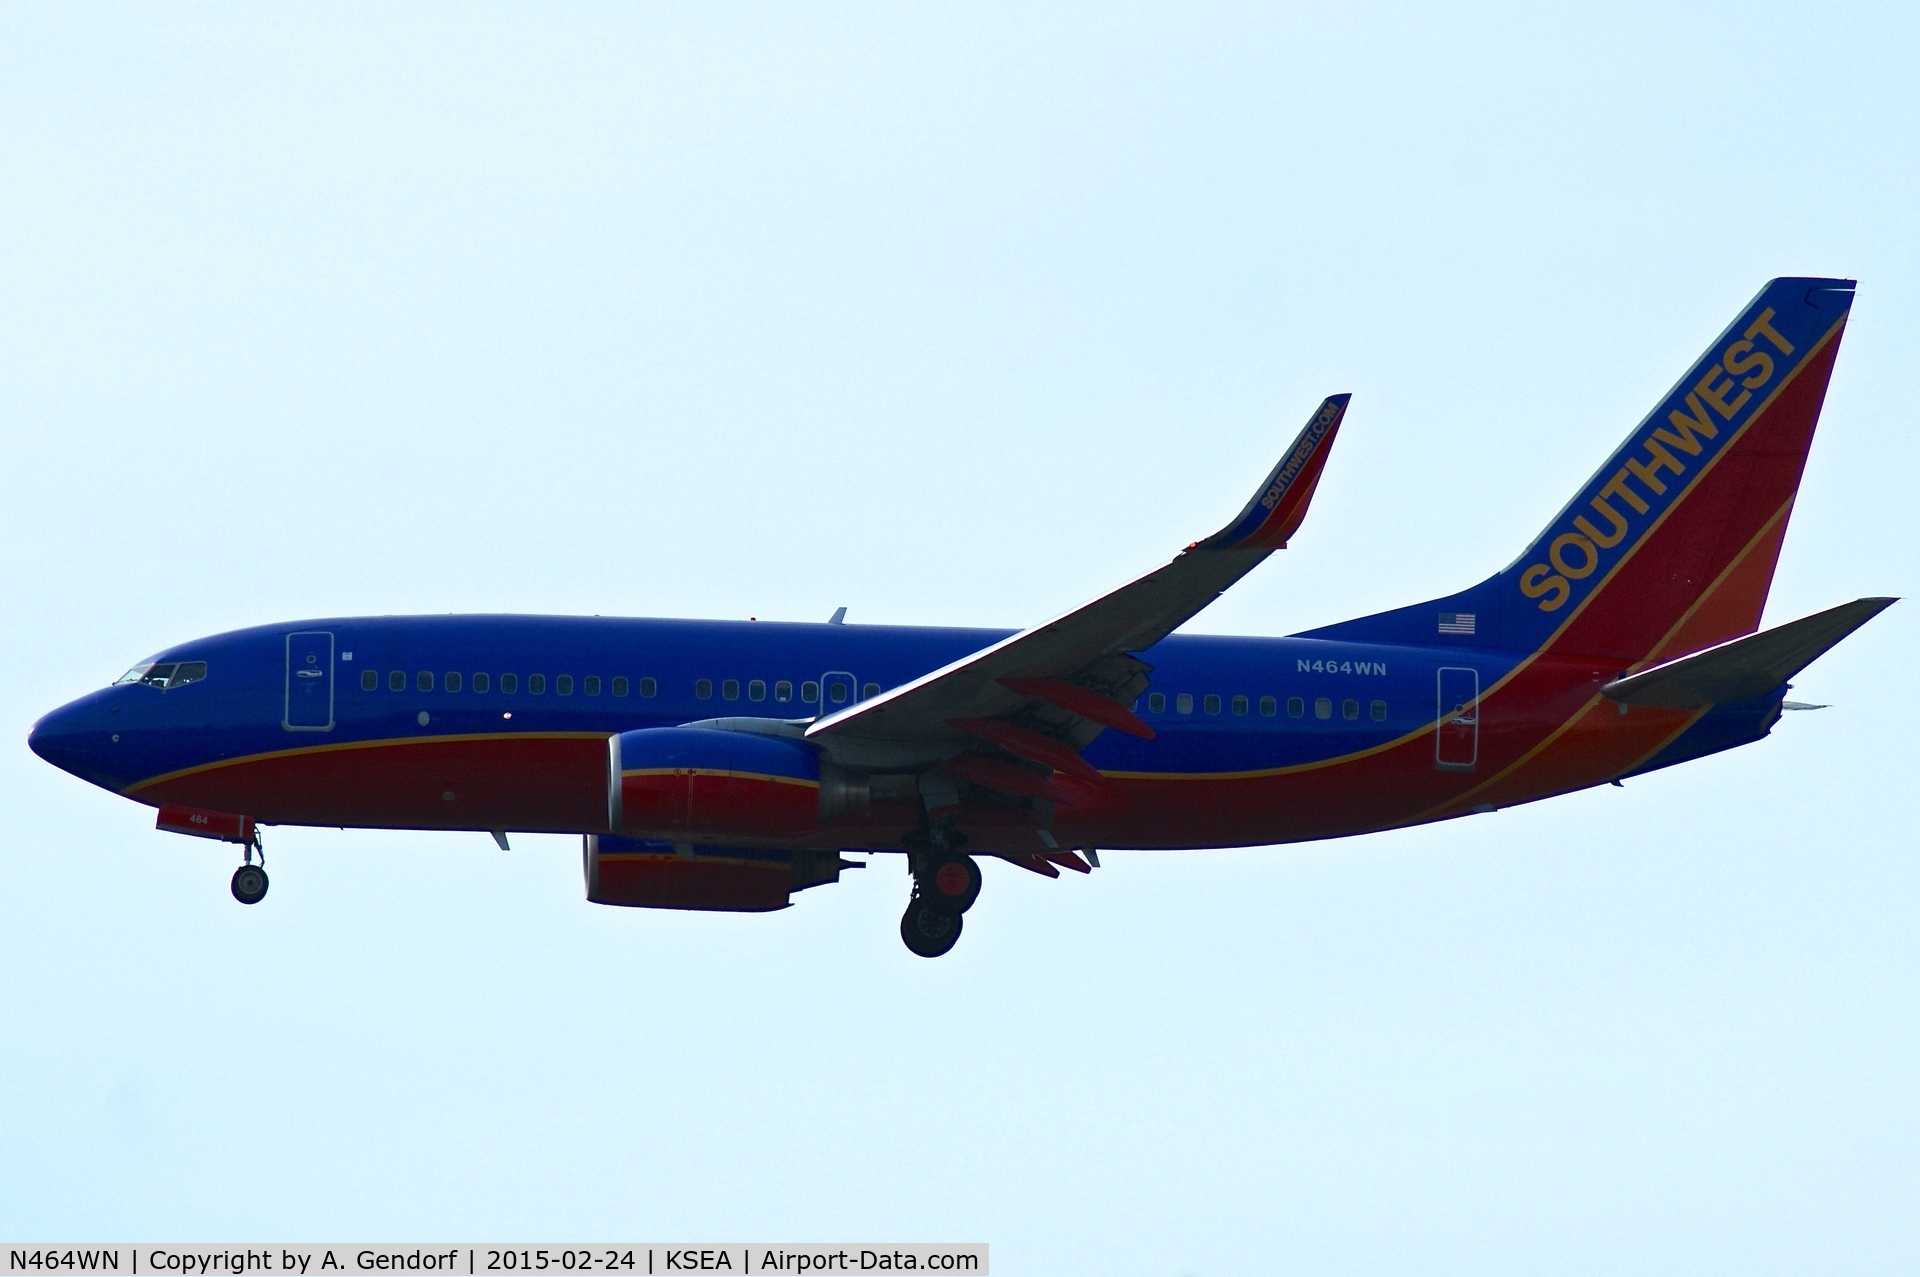 N464WN, 2004 Boeing 737-7H4 C/N 32468, Southwest Airlines, is here landing at Seattle-Tacoma Int'l(KSEA)